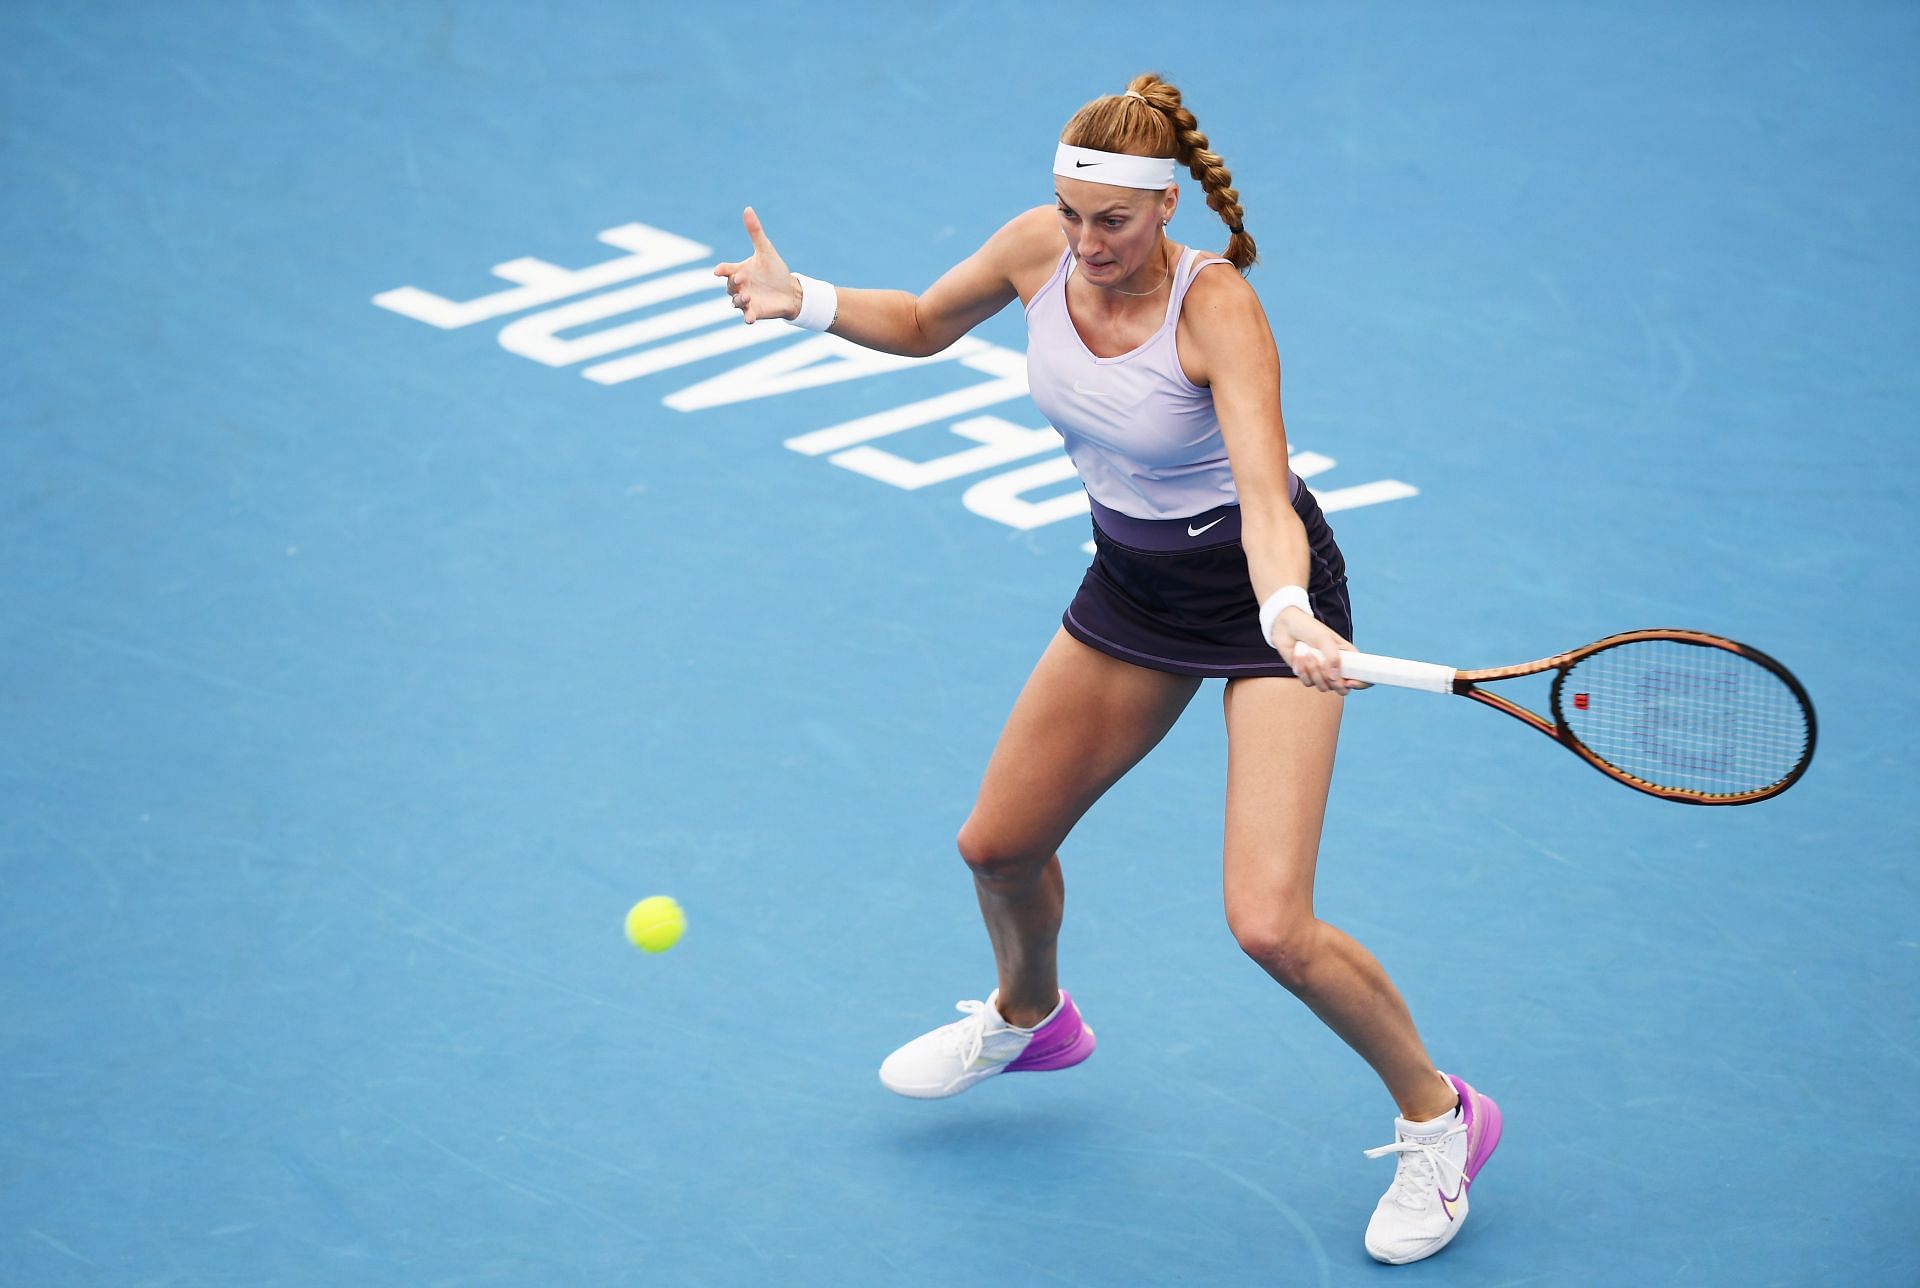 Kvitova has played a couple of solid matches at the Adelaide International 2.